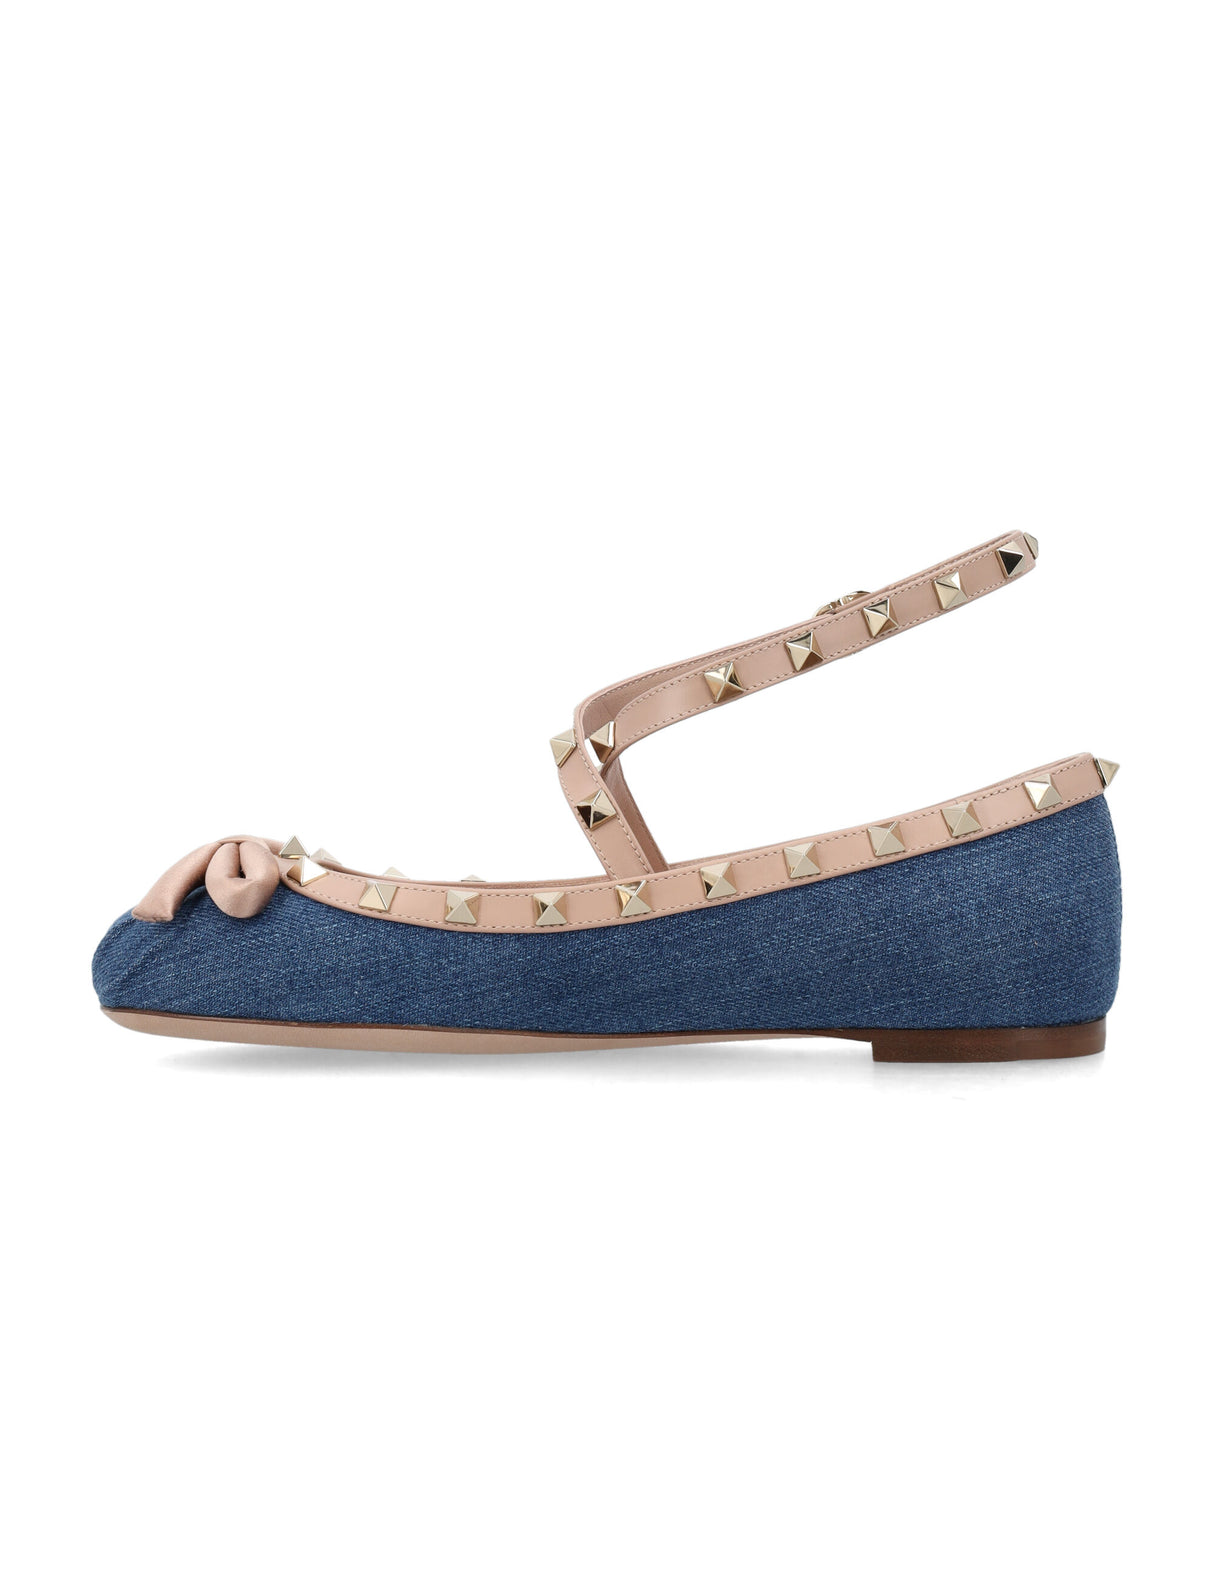 Denim Rockstud Flats in Rose and Canelle for Women